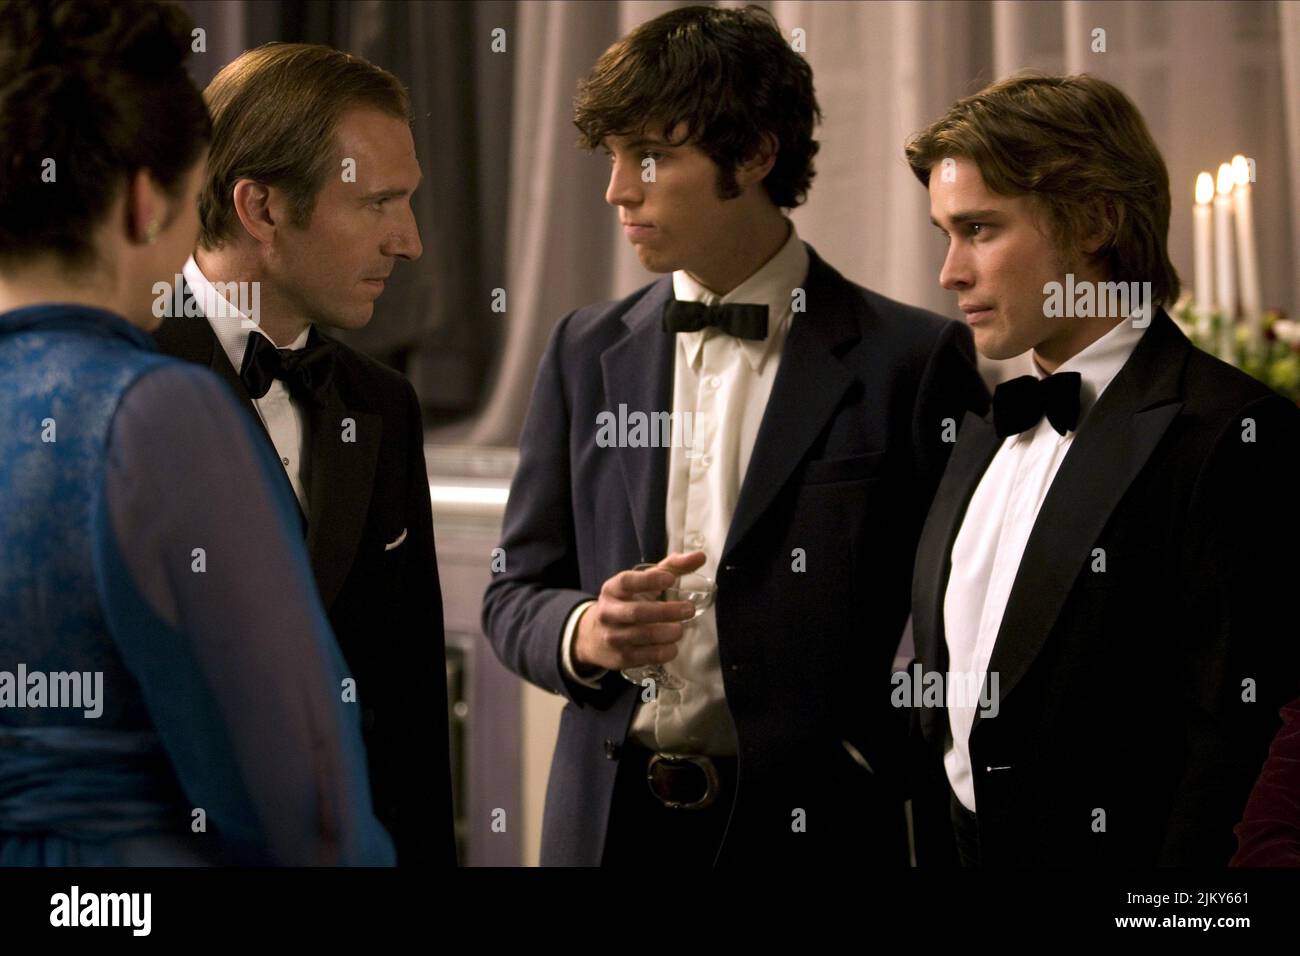 RALPH FIENNES, TOM HUGHES, CHRISTIAN COOKE, CEMETERY JUNCTION, 2010 Stock Photo